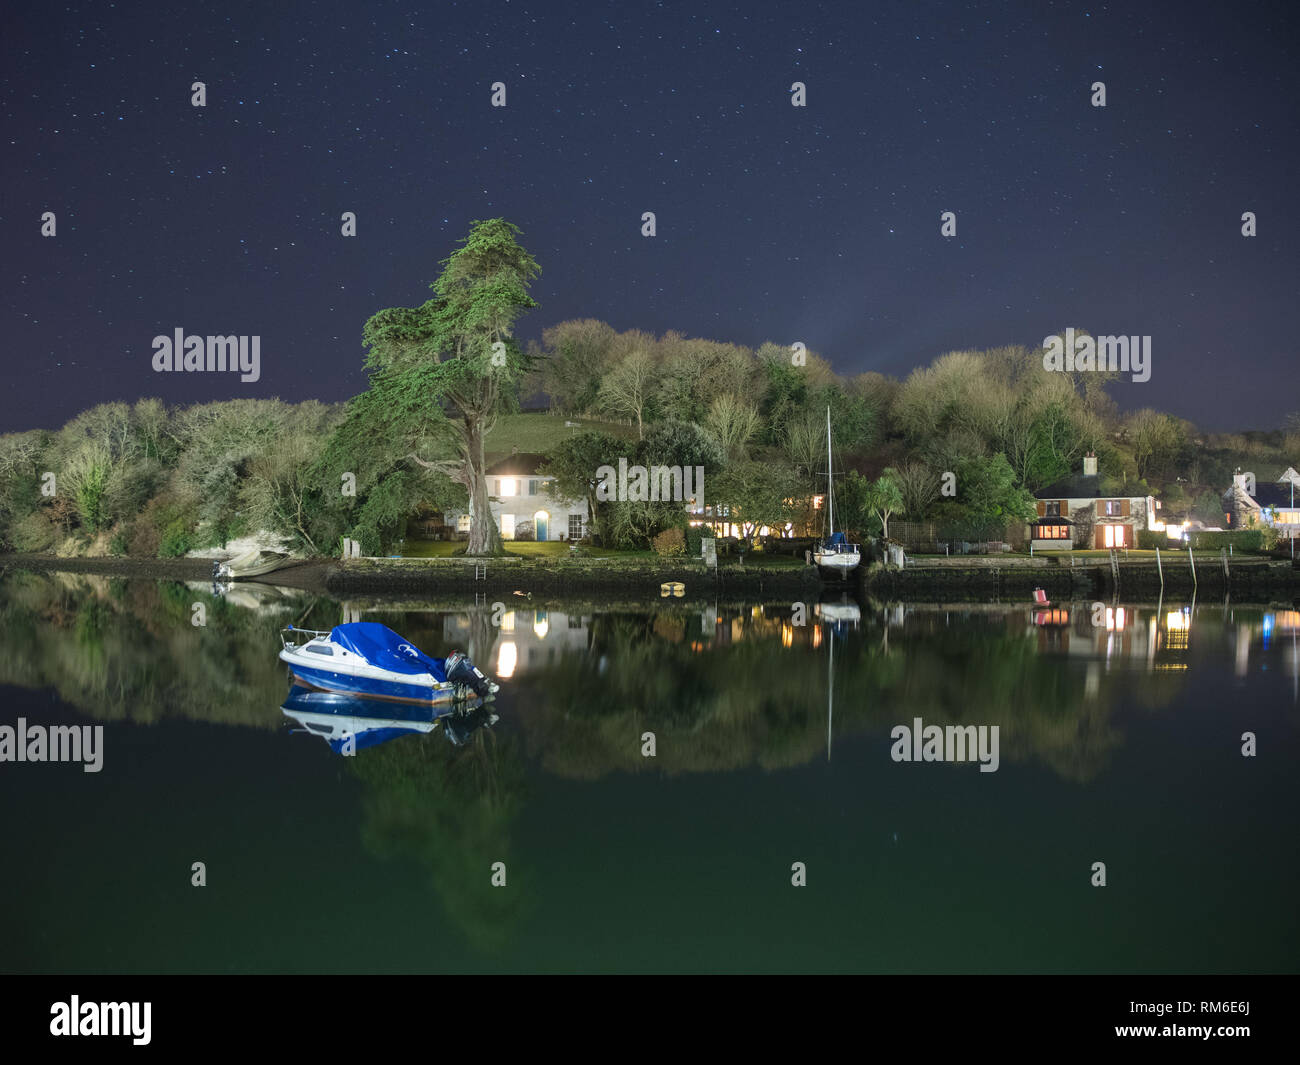 A late night photograph of the stars over the estuary in Kingsbridge, South Devon. Stock Photo